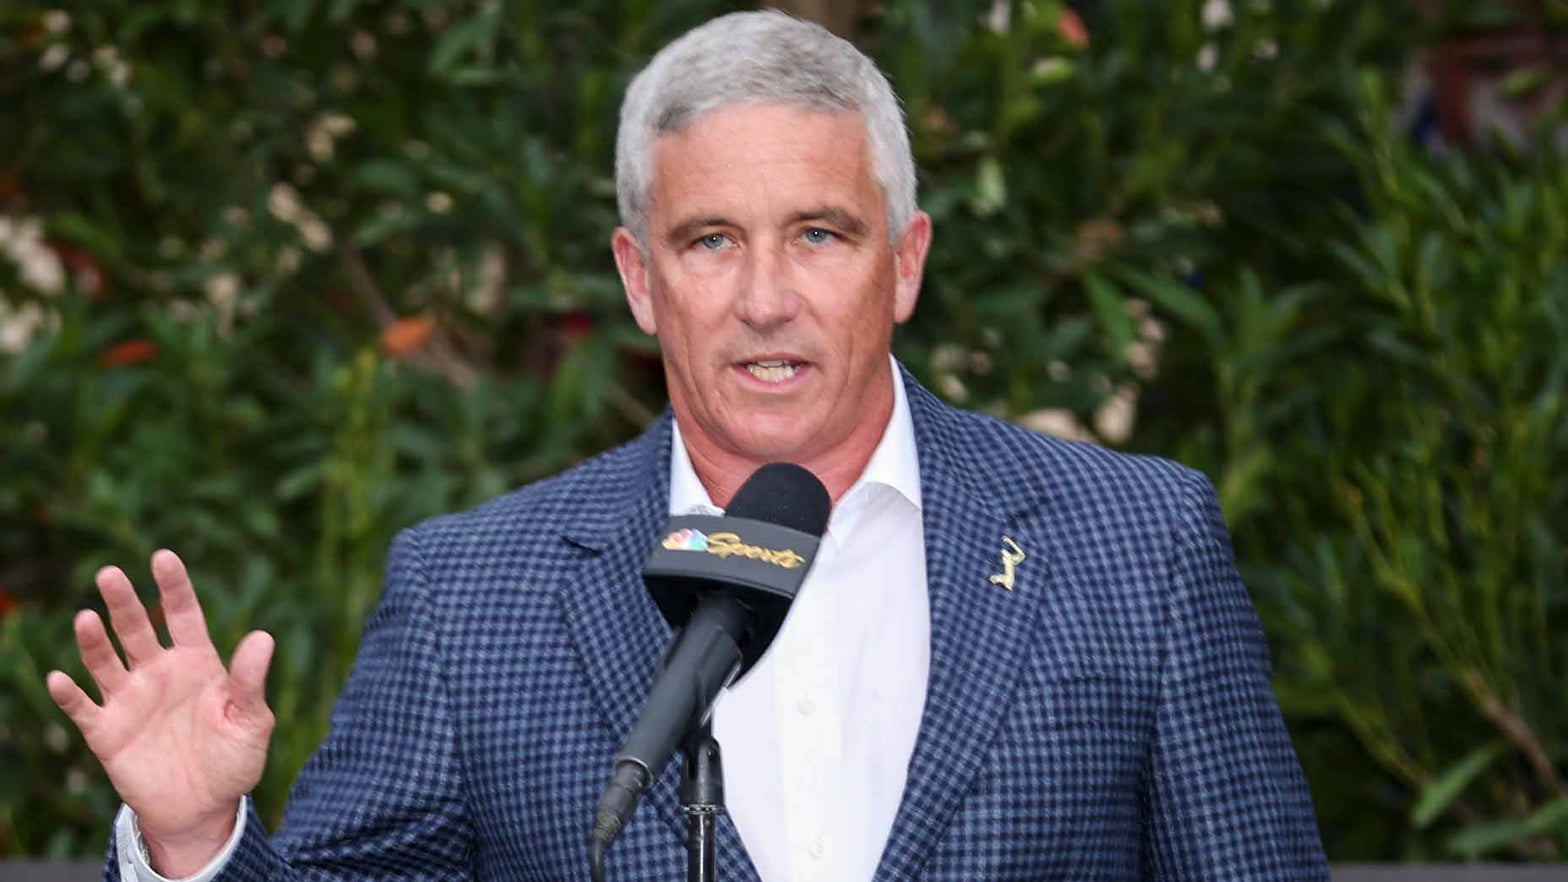 With Jay Monahan's sudden absence, the PGA Tour faces unprecedented